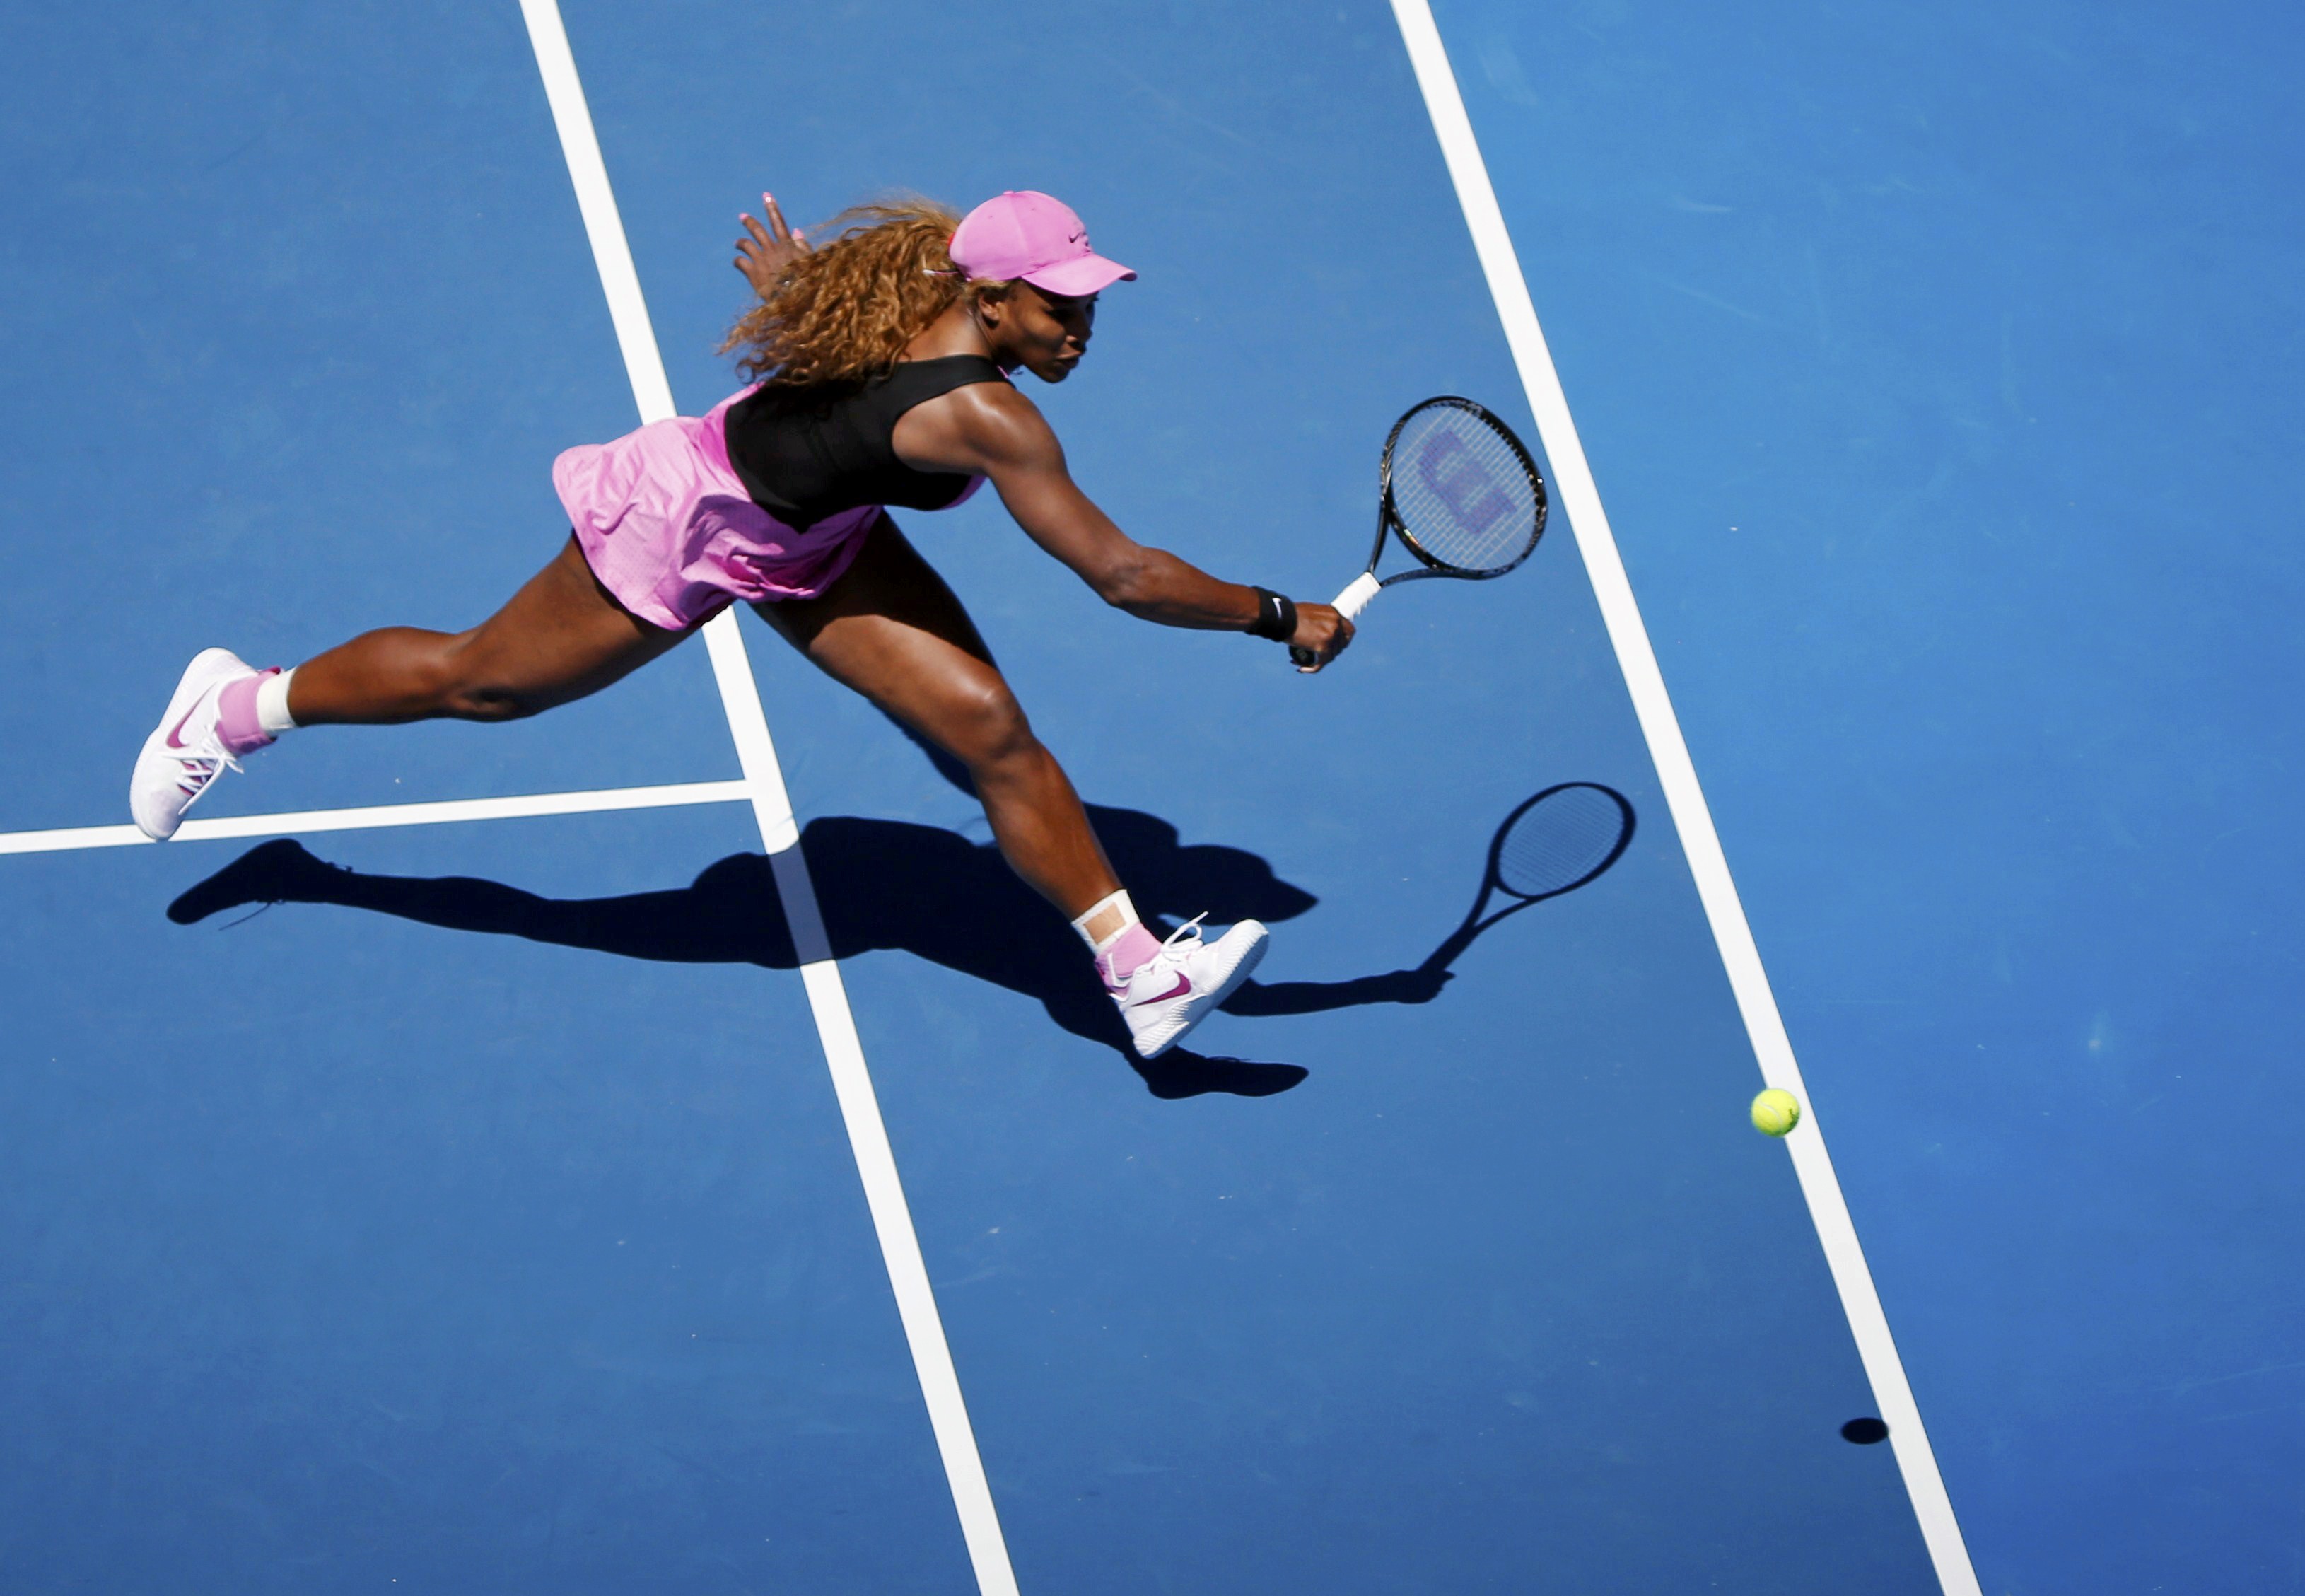 Serena Williams stands a chance to become the first three-time winner in the women's singles at Indian Wells, a feat she failed to achieve last year when she withdraw from the semi-final with a knee injury. – Reuters file pic, March 14, 2016.